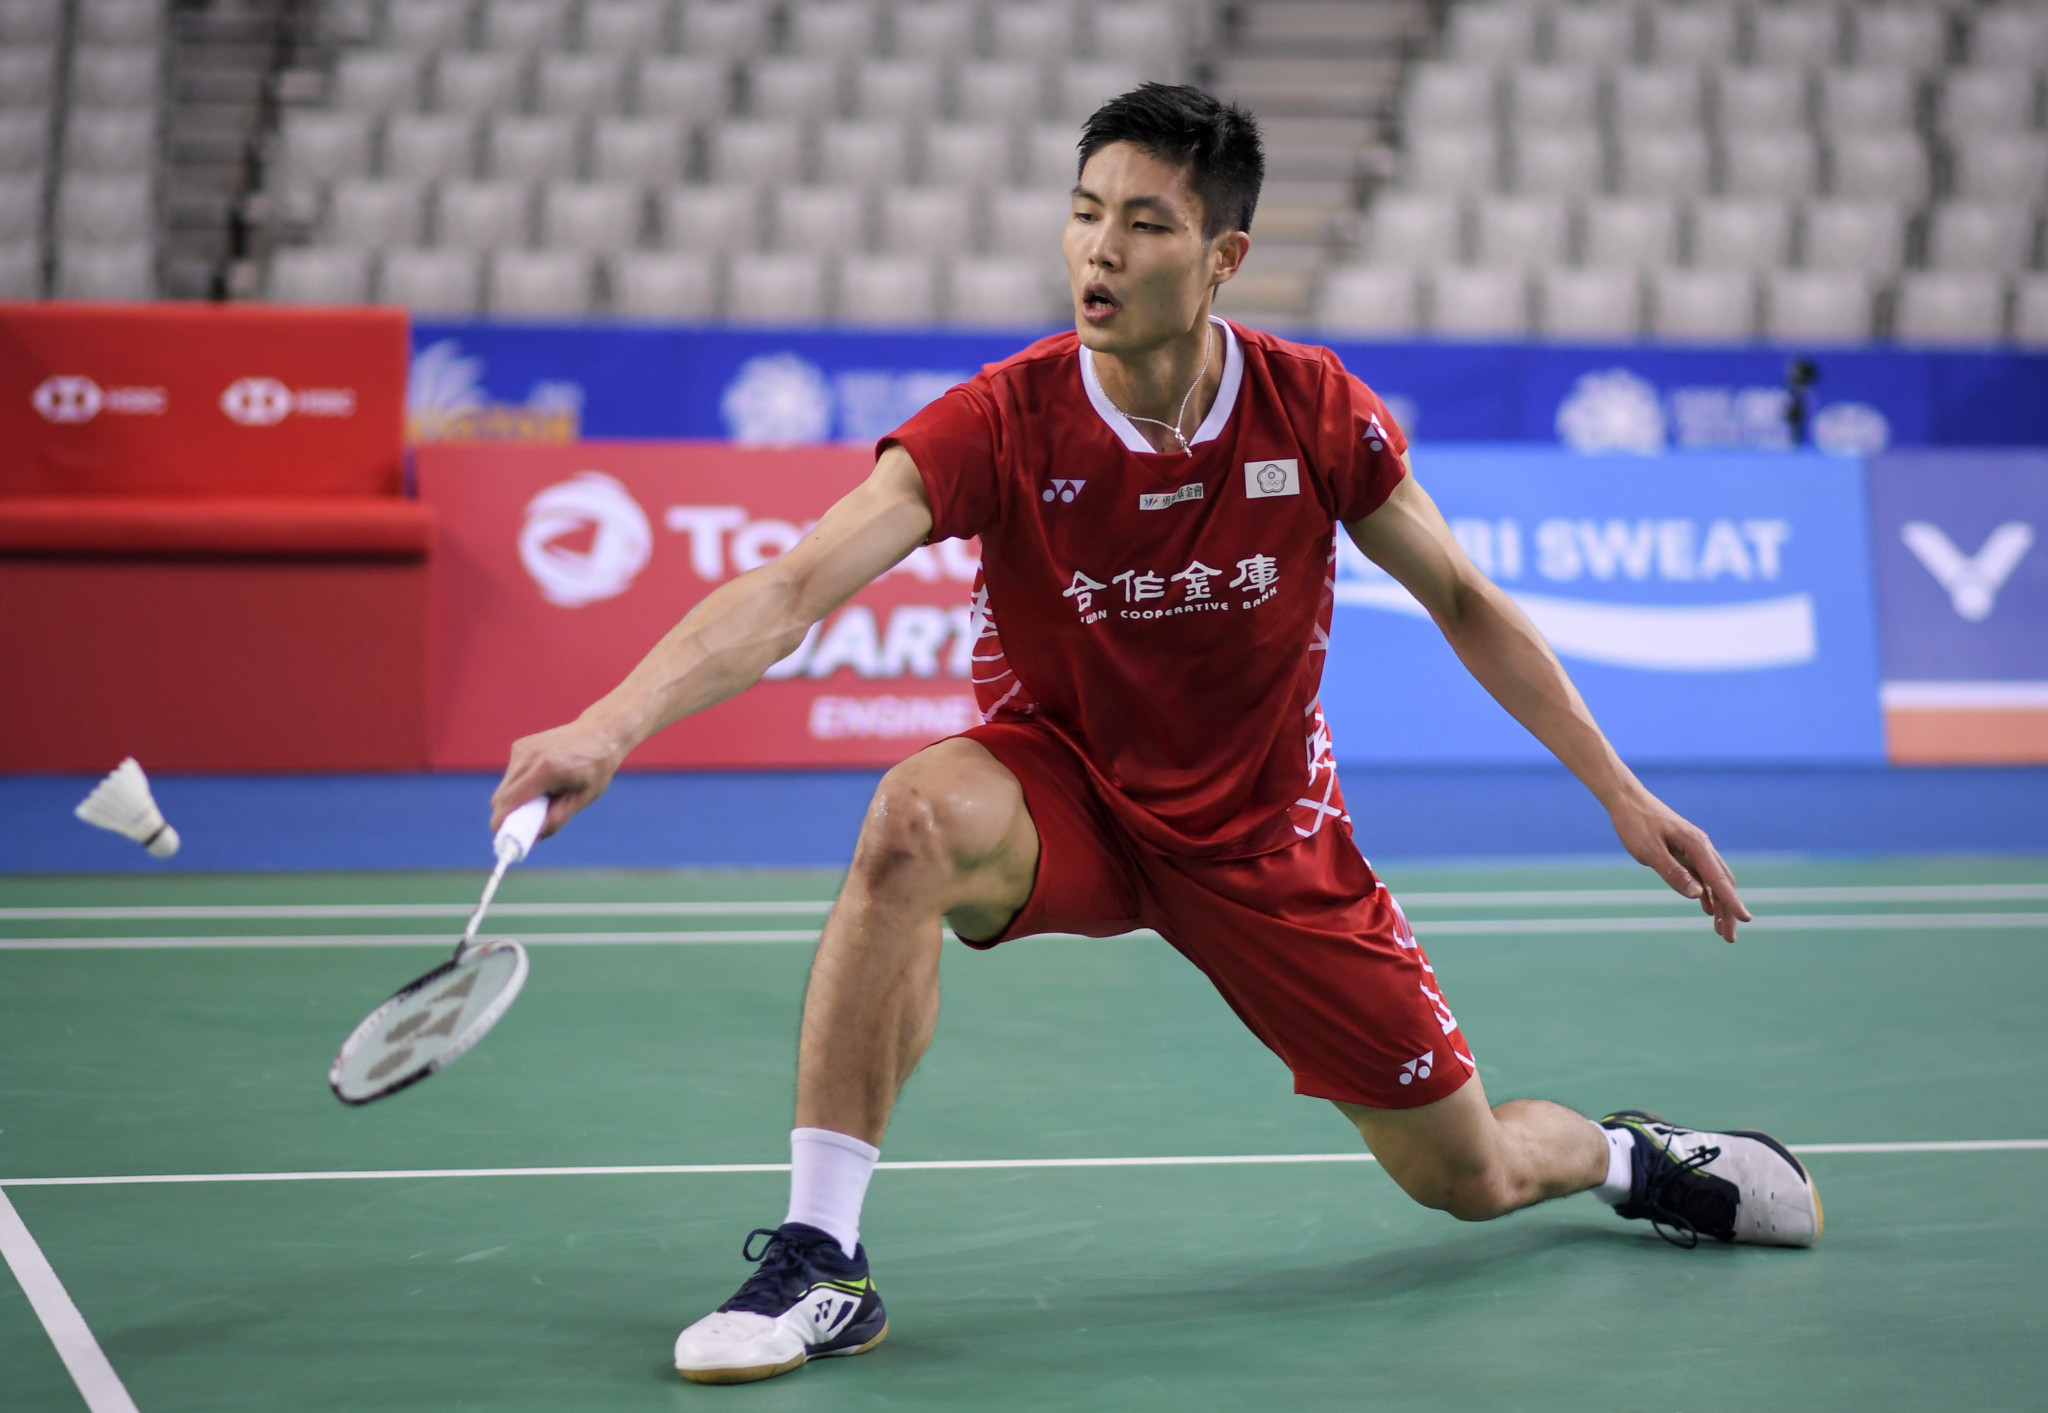 Top men's seed Chou Tien-chen progressed into the next round ©Getty Images